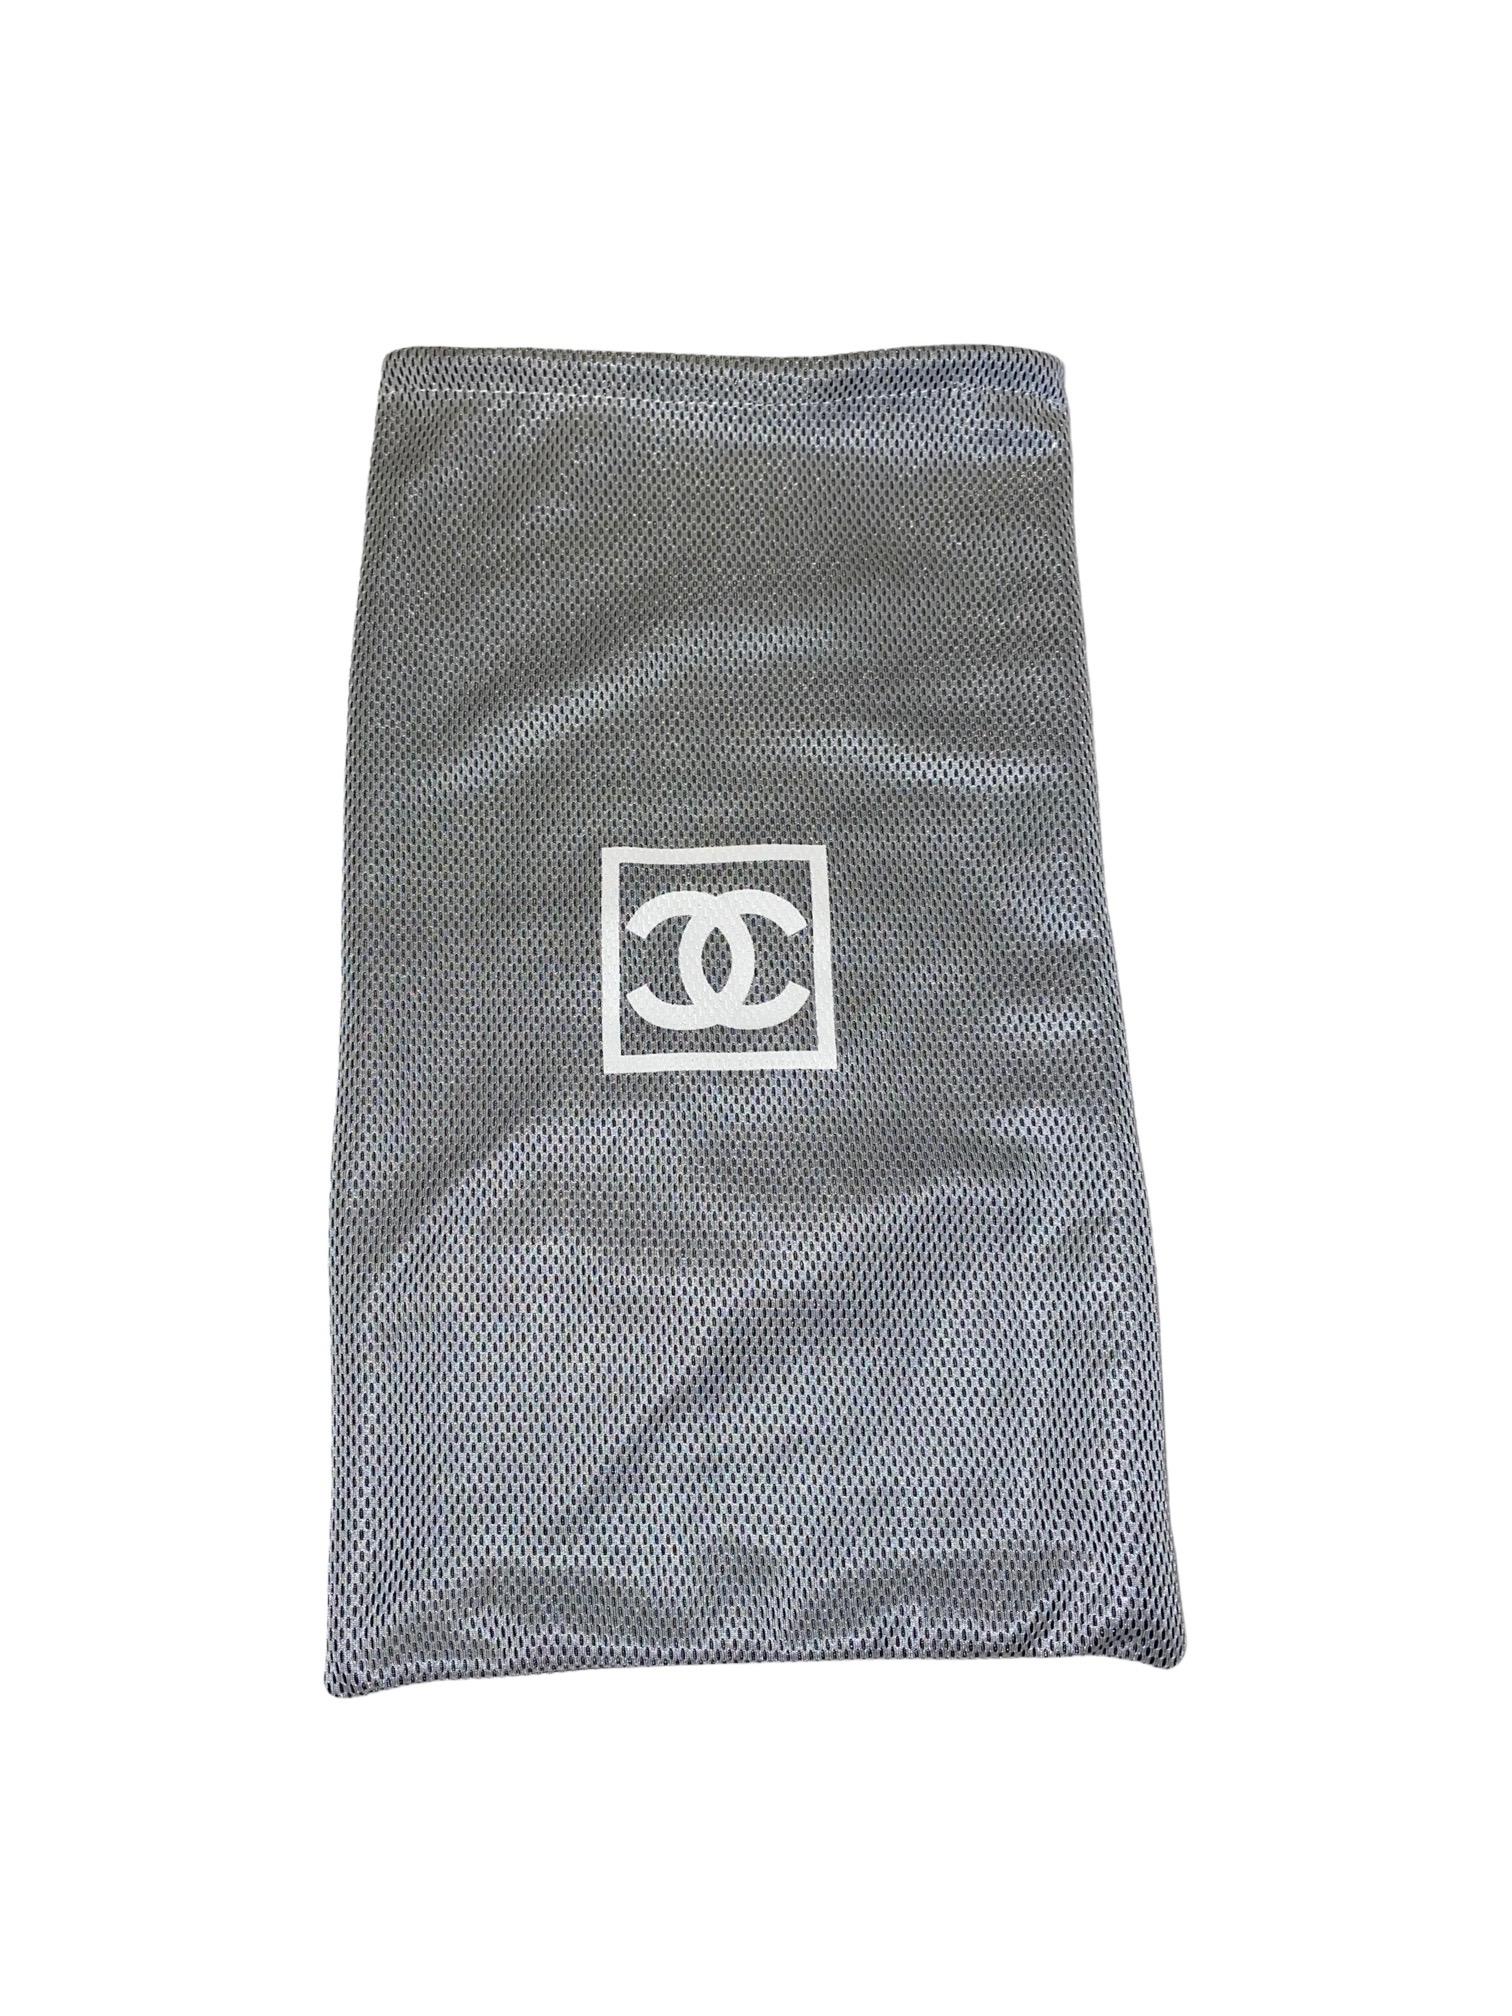 NEW Chanel CC Logo Signature Two-Sided Terry Cloth Beach Pool Sport Towel  For Sale 1